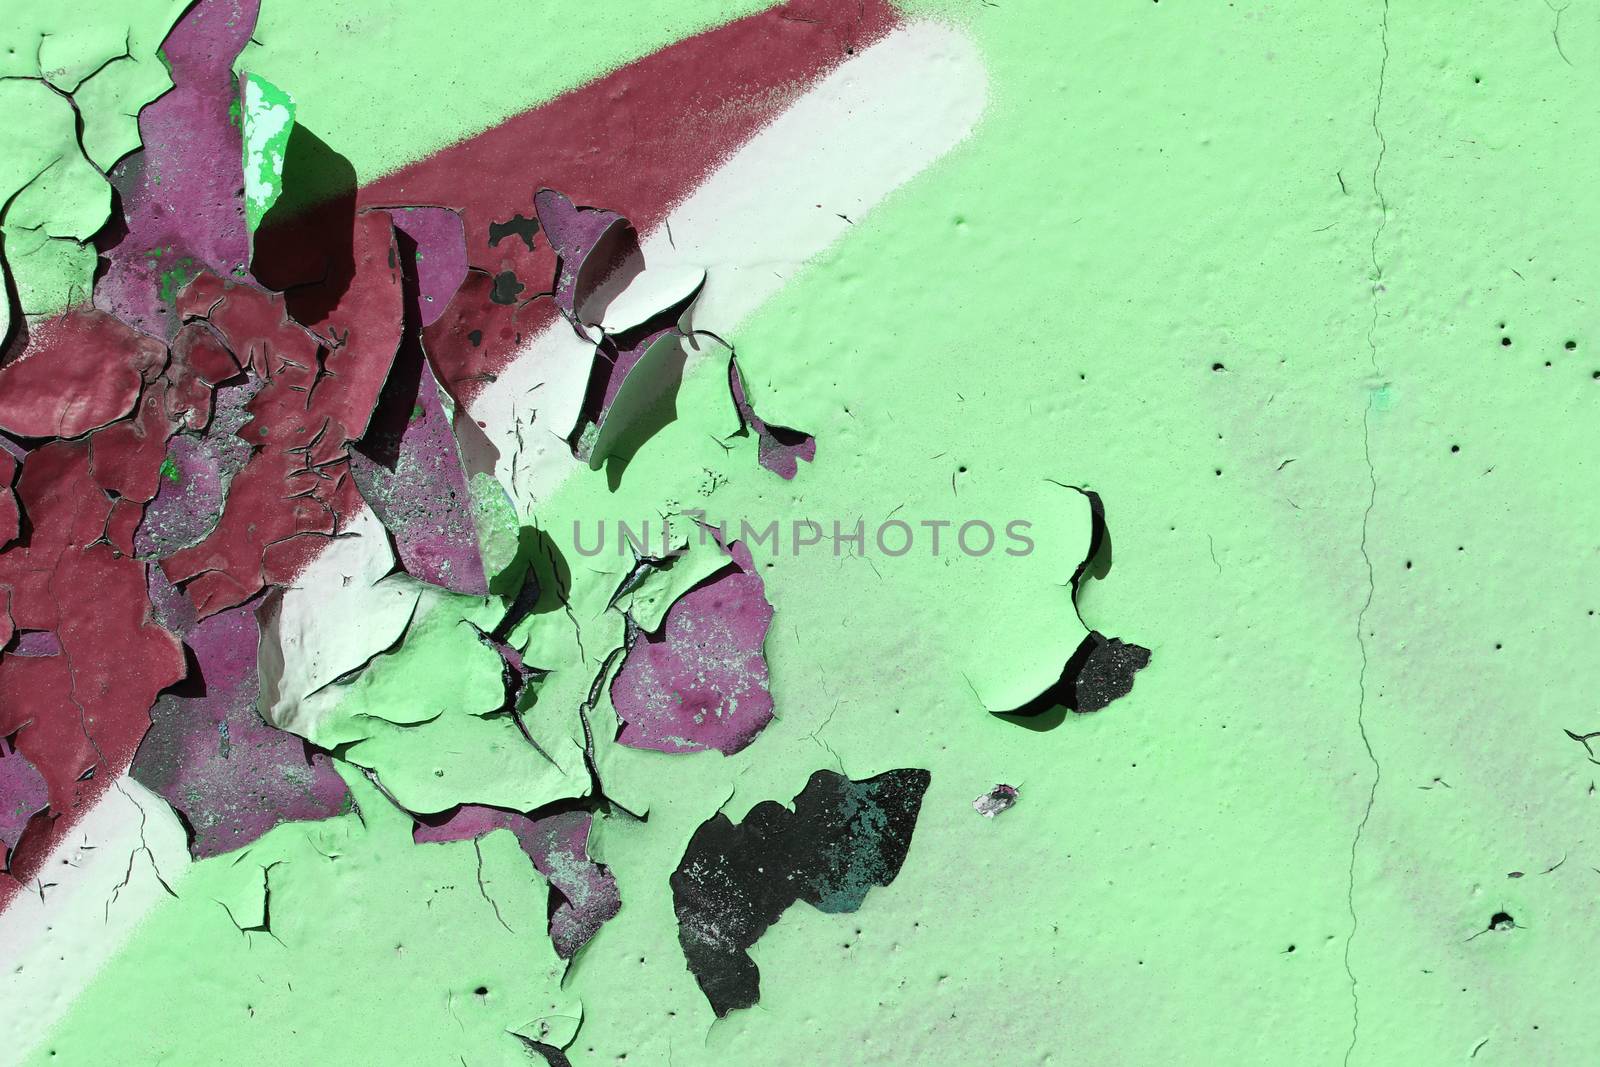 Old Weathered Graffiti Wall. Colorful Concrete Wall Fragment. Pistachio.